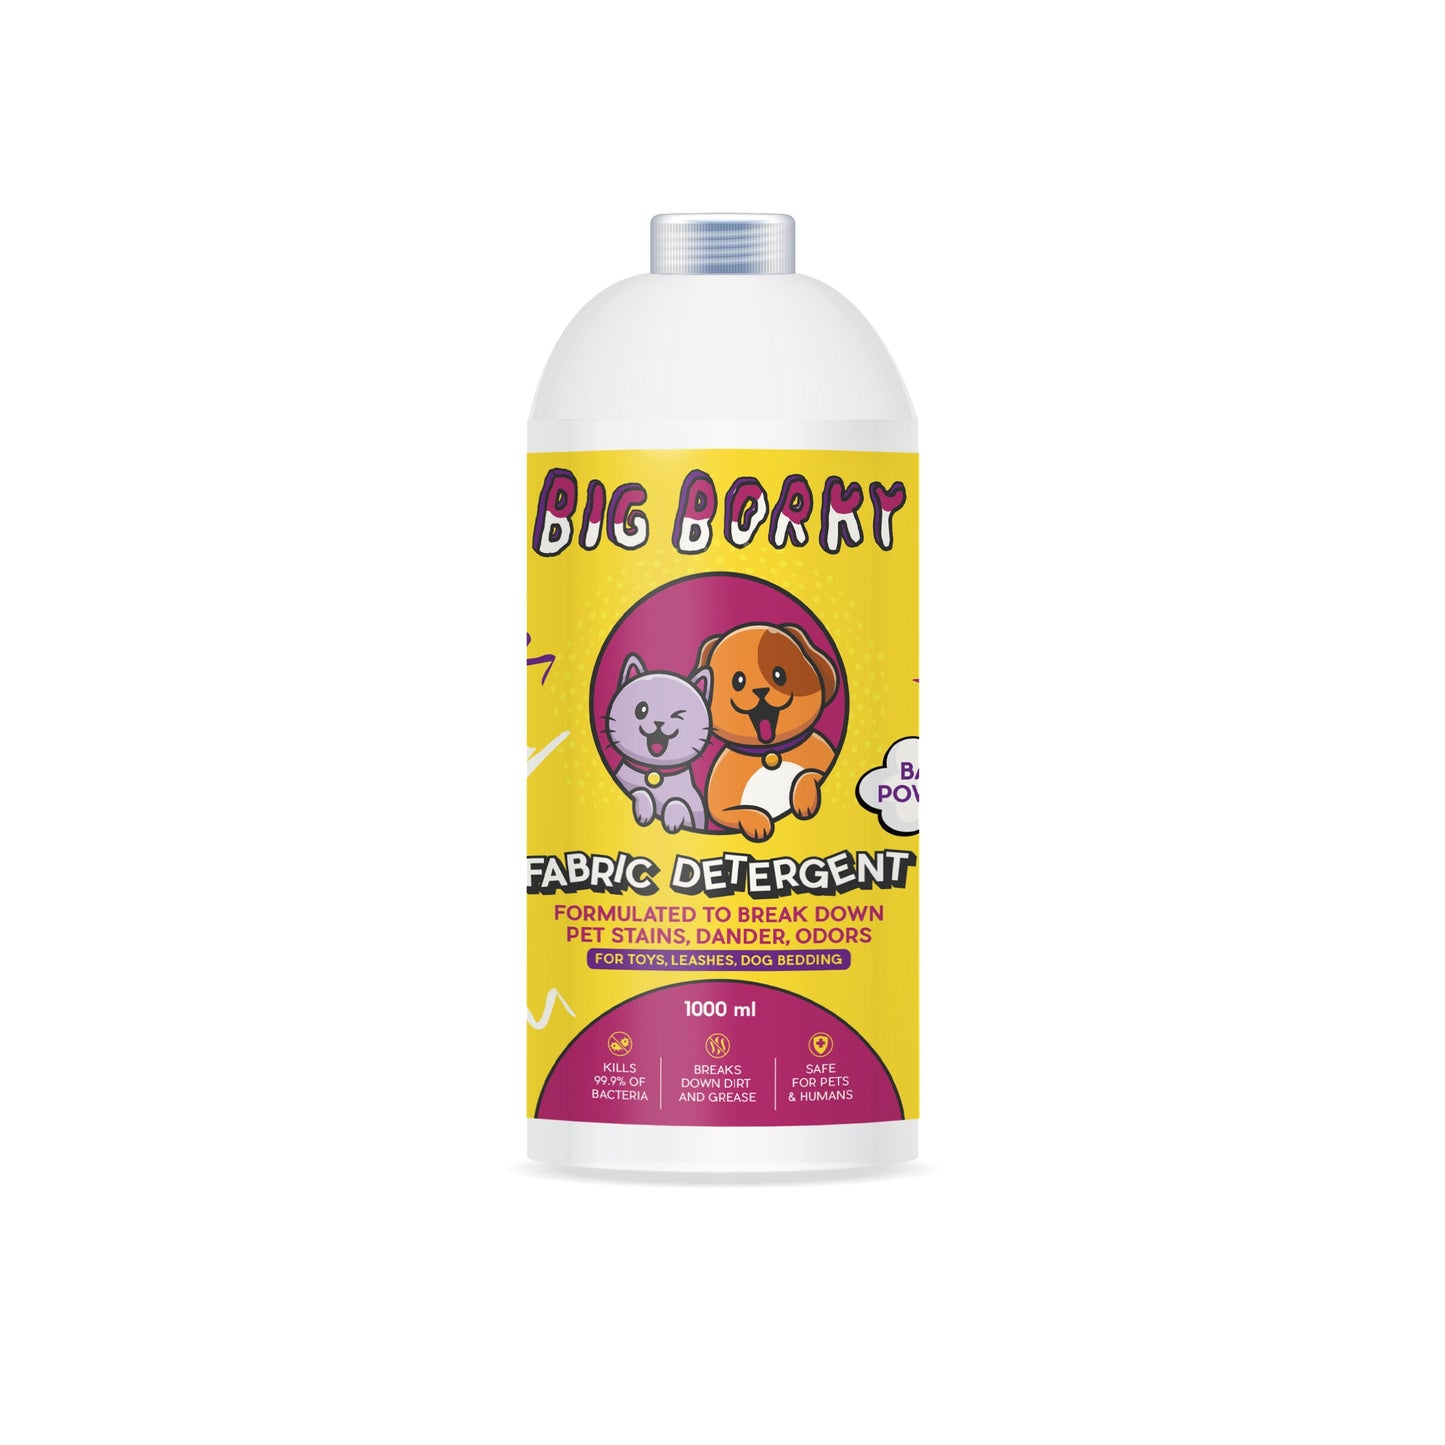 🎁 FREE GIFT: Fabric Detergent - Breaks Down Pet Stains, Dander, Odours